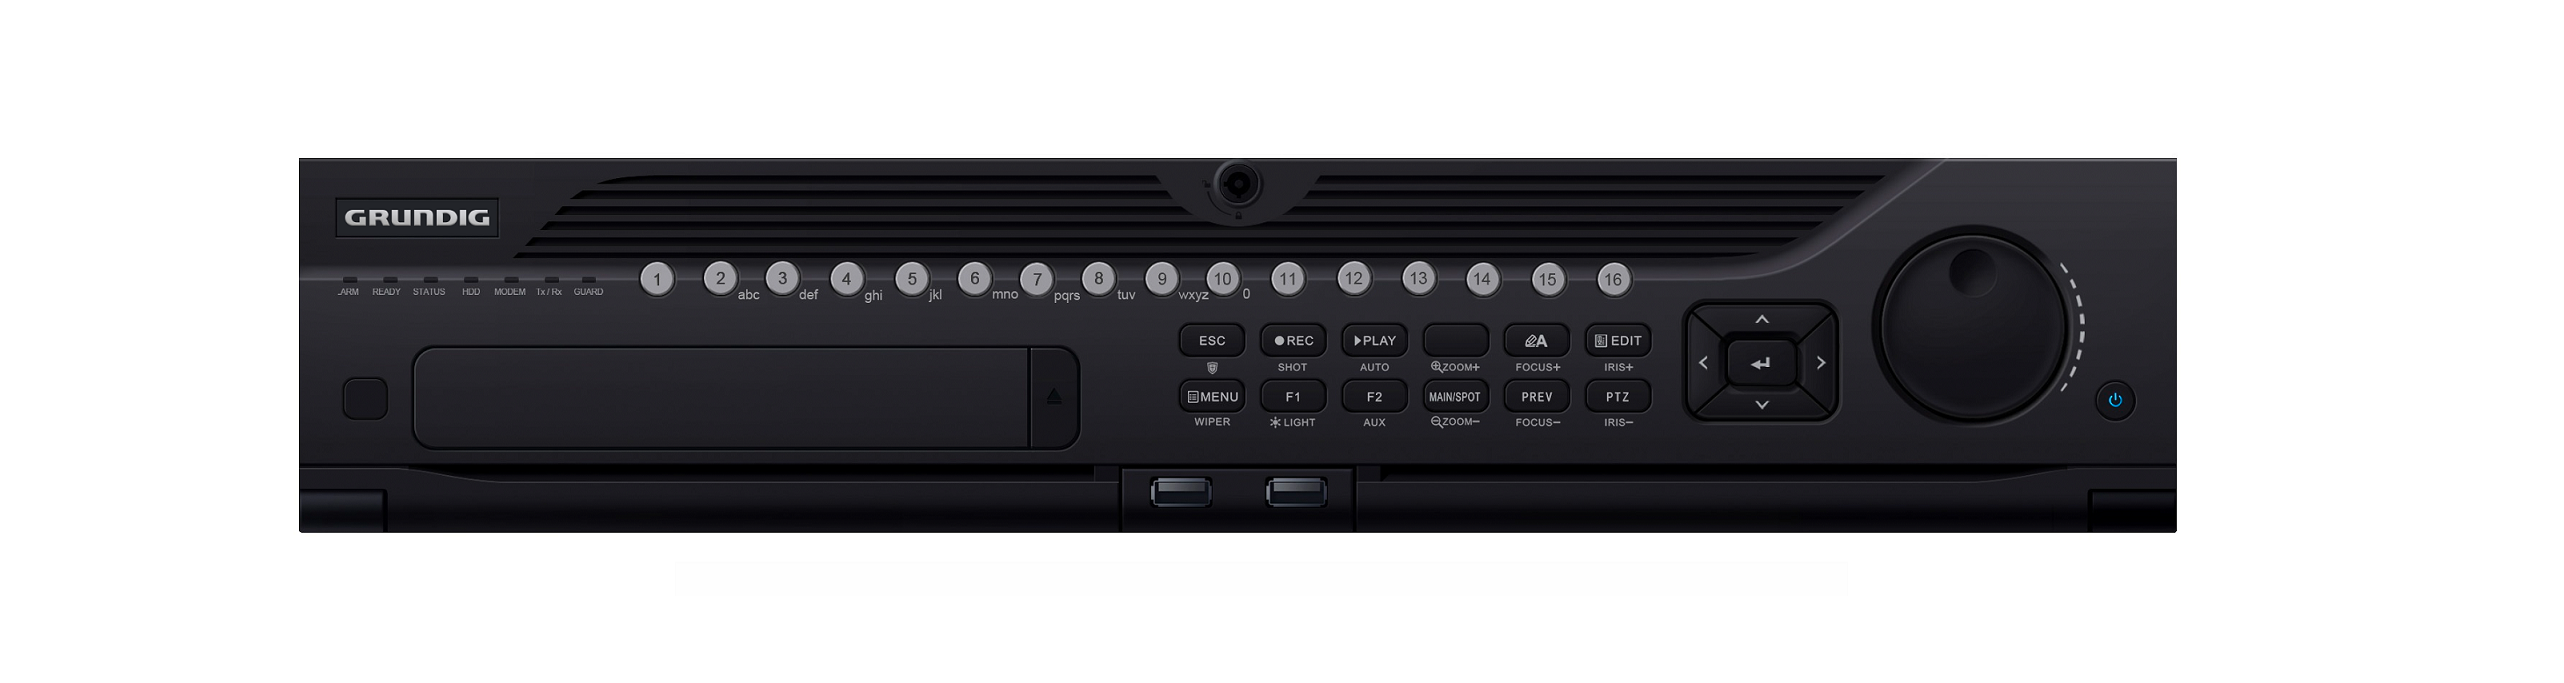 32 Channel Network Video Recorder